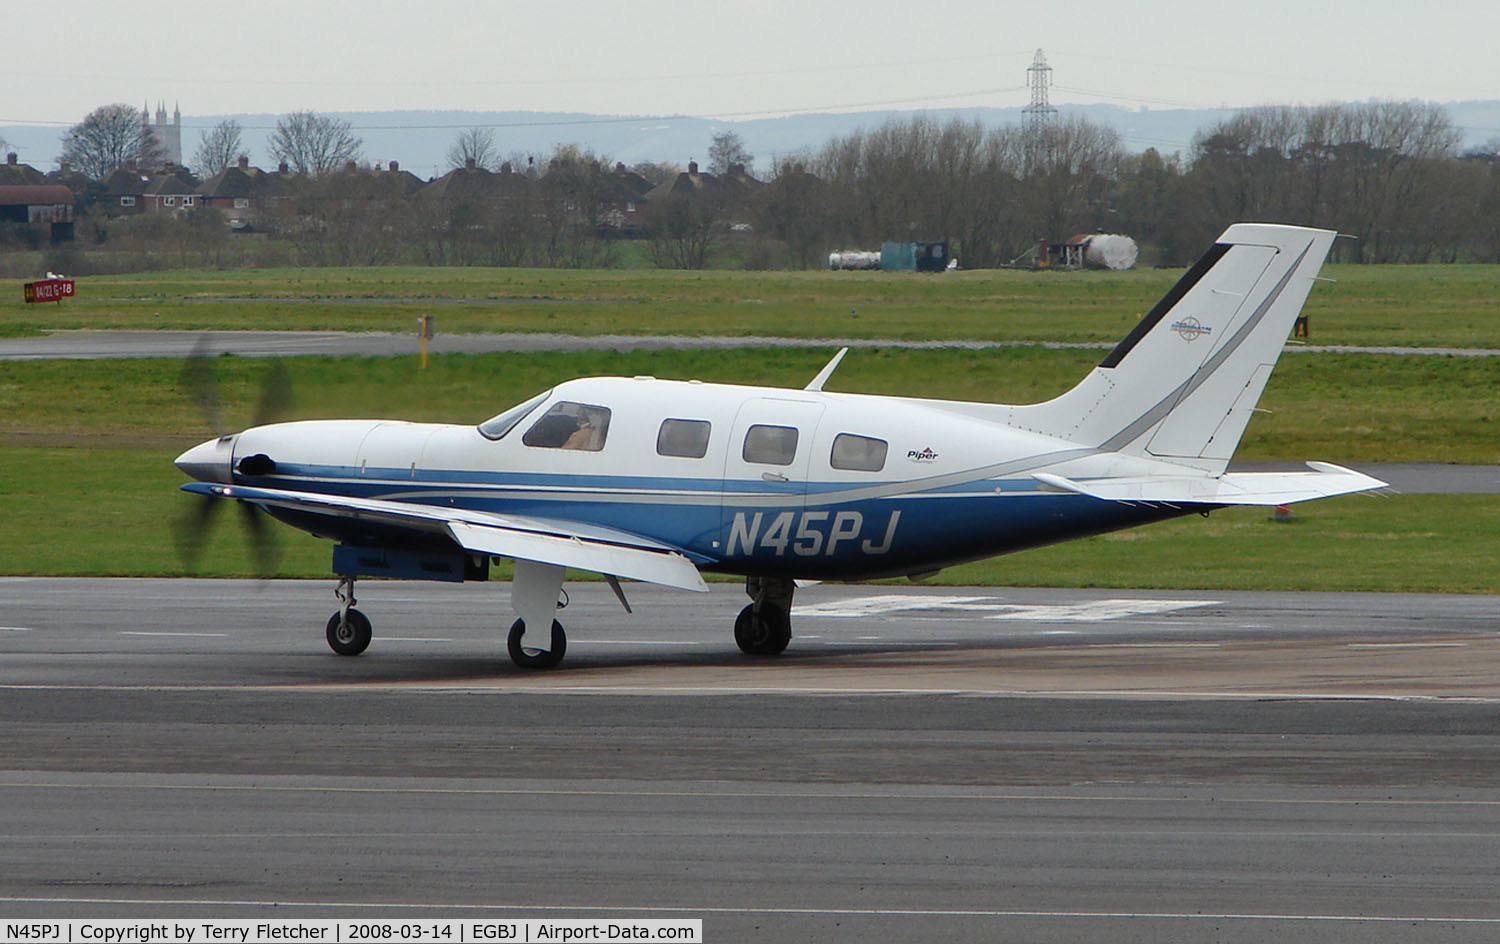 N45PJ, 2001 Piper PA-46-500TP C/N 4697031, A visitor to Gloucestershire Airport on the day of the horse racing Gold Cup  at the nearby Cheltenham Racecourse